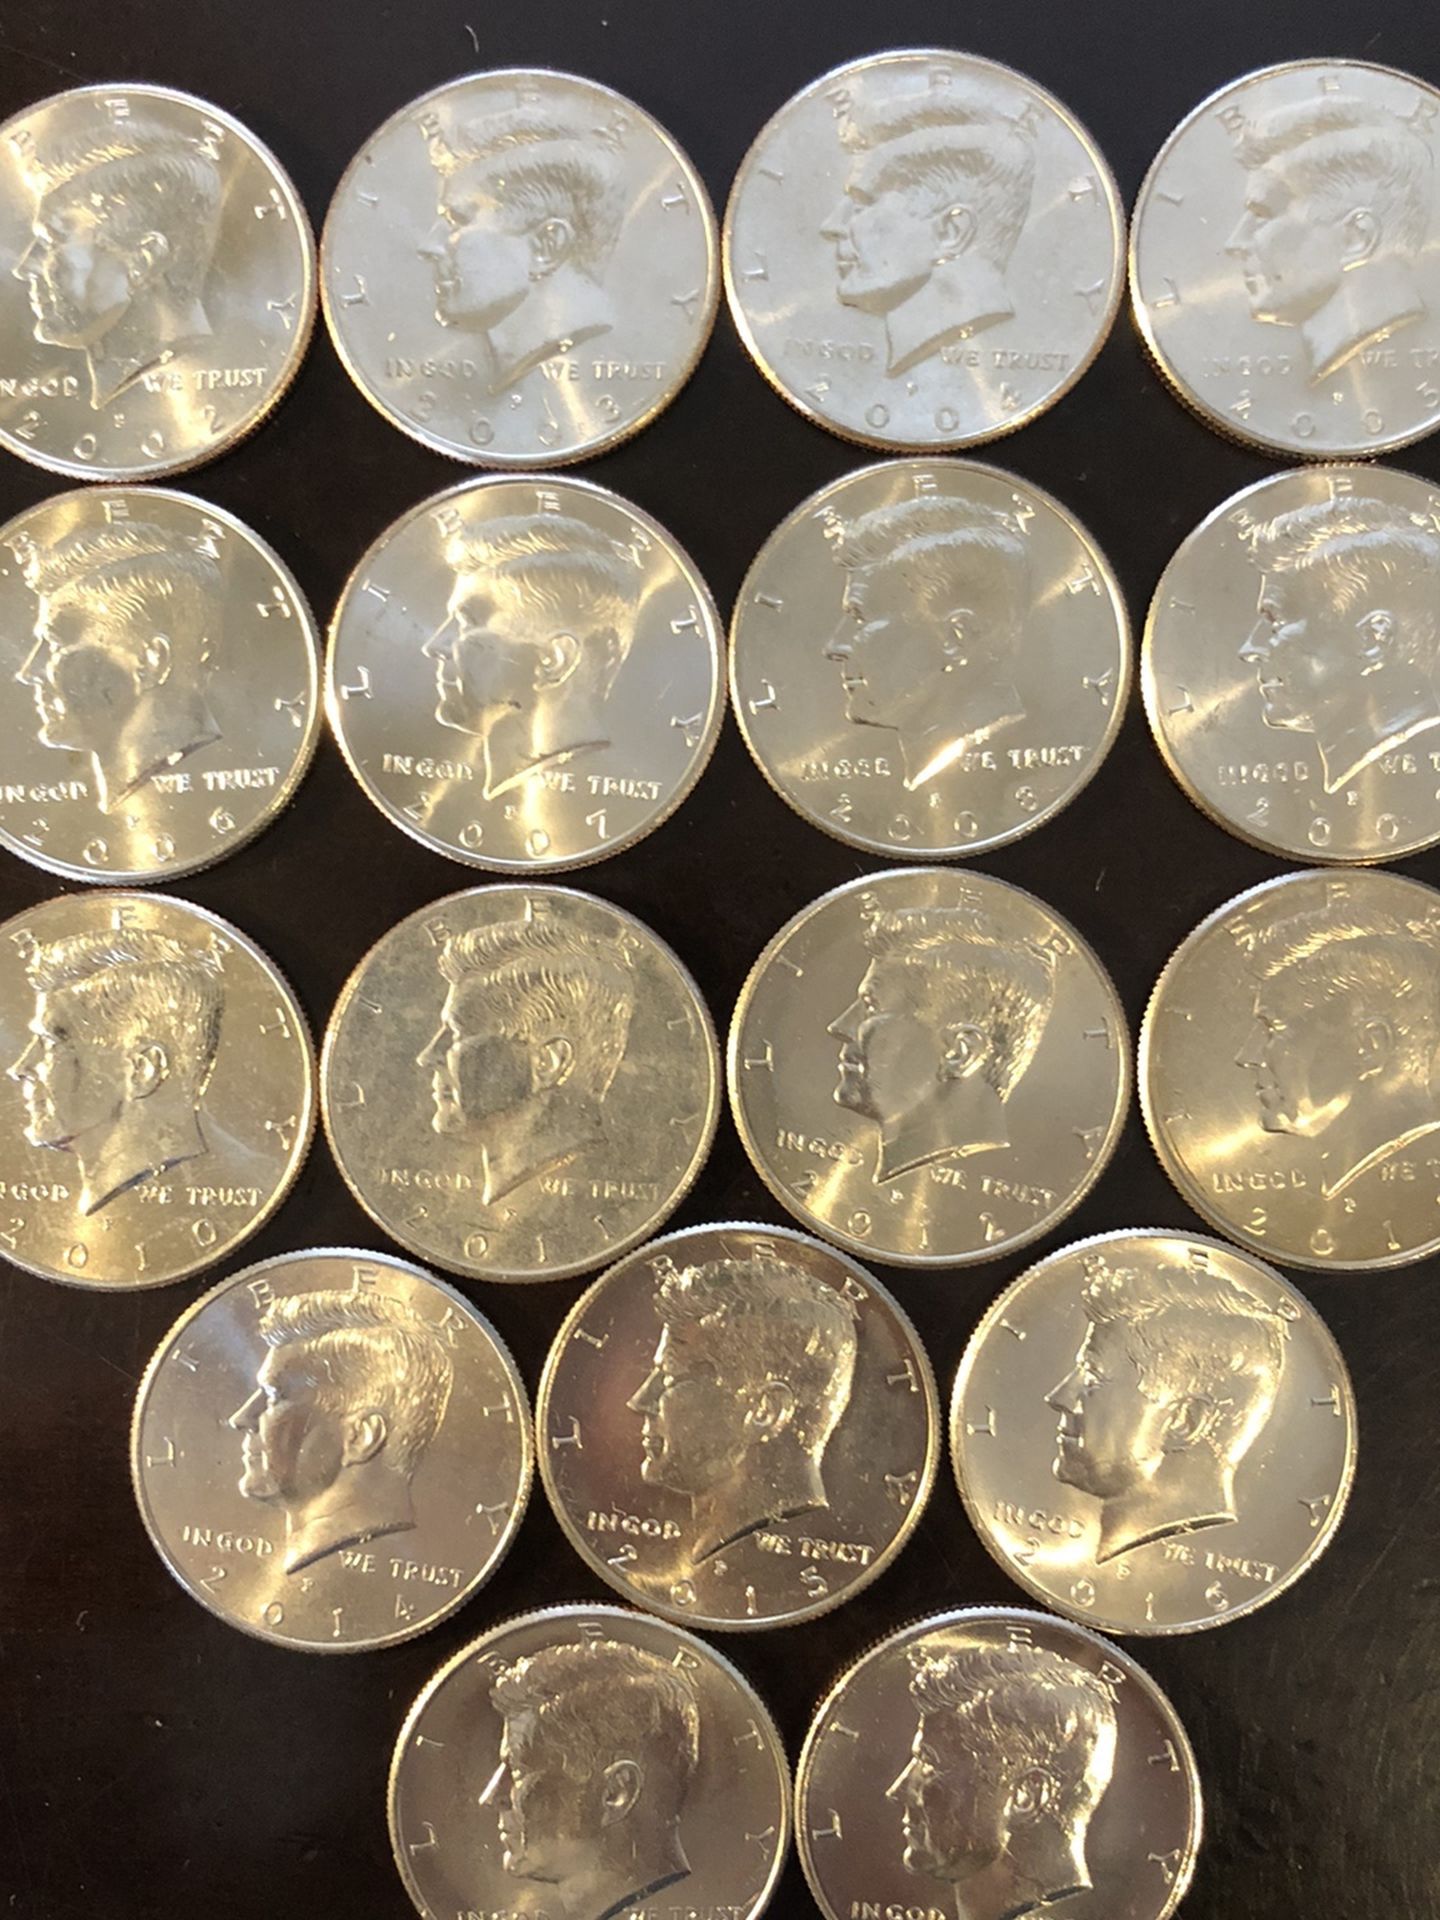 KENNEDY HALF DOLLAR COINS - “NIFC” - LOW MINTAGE!!! - 17 Coins for $23 - Dates 2002-2018 all P Mint Mark - not Silver coin